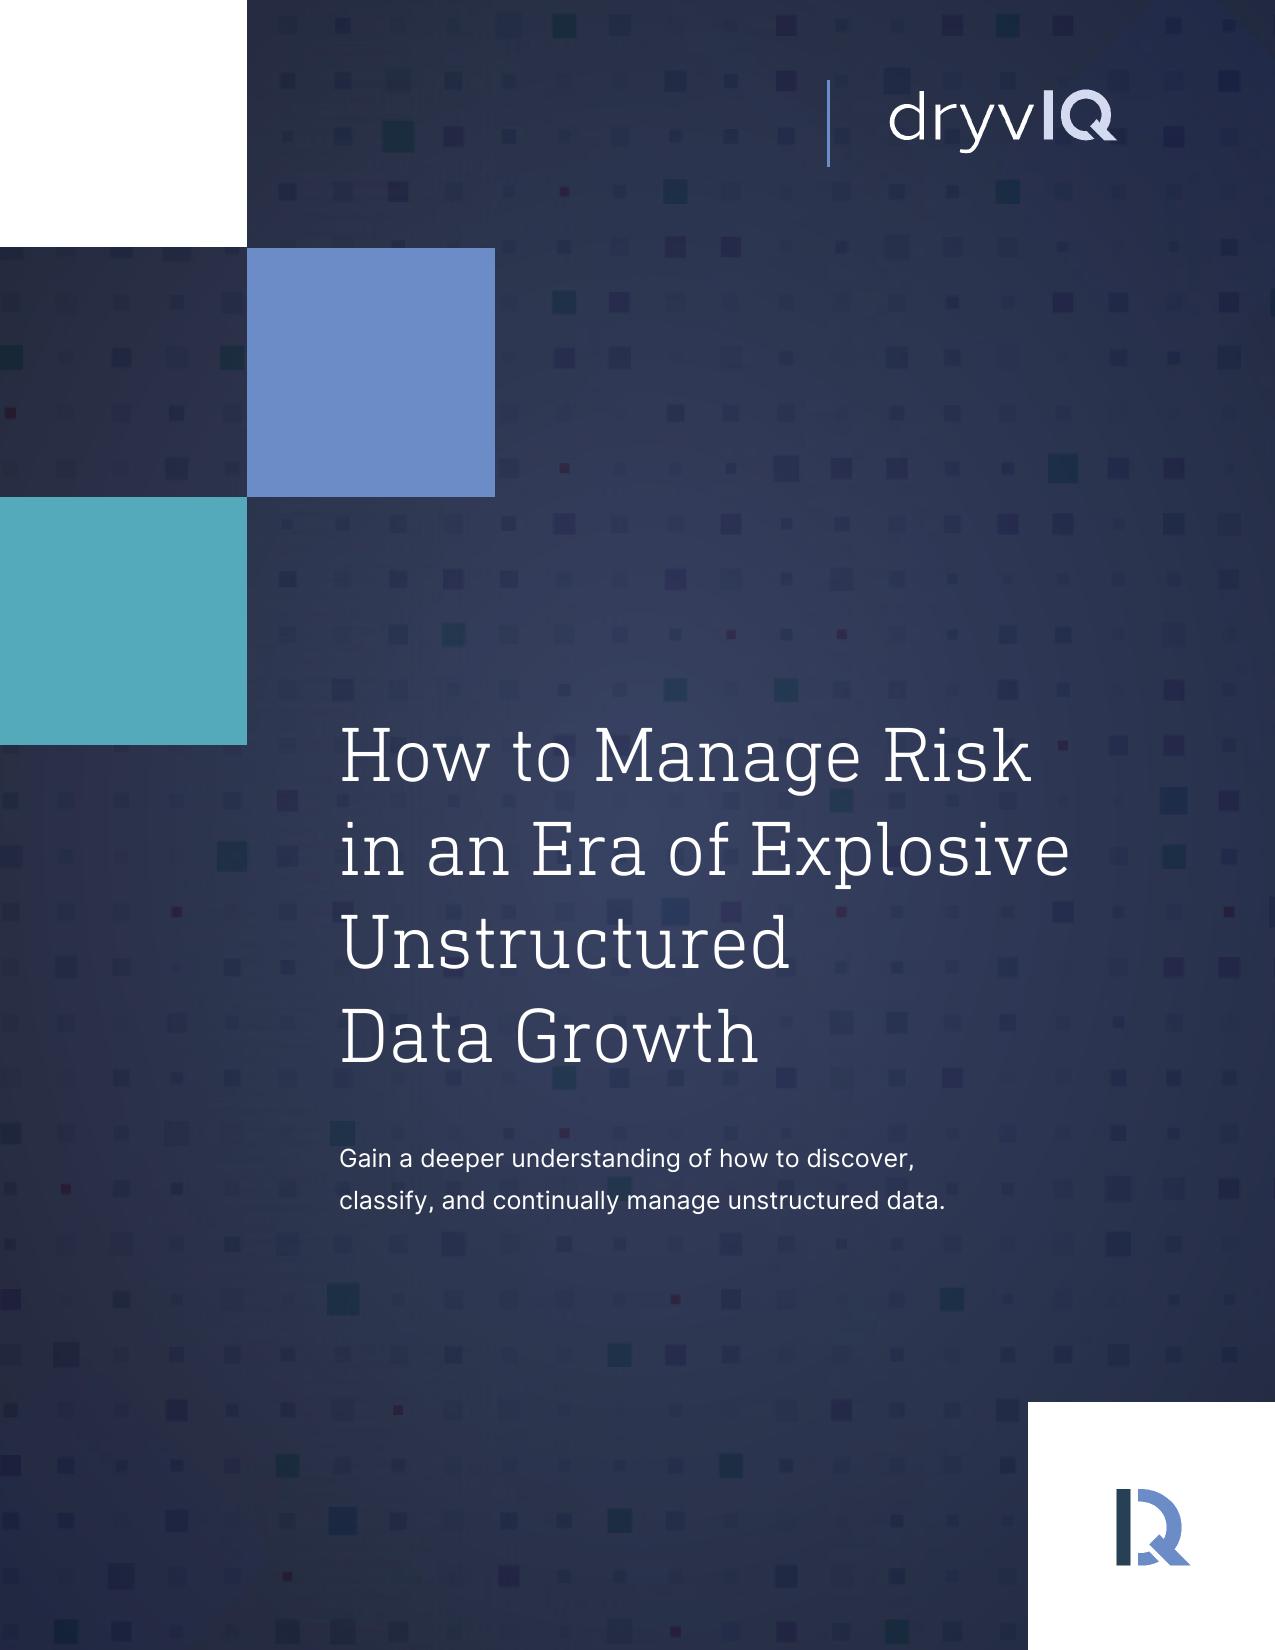 How to Manage Risk in an Era of Explosive Unstructured Data Growth